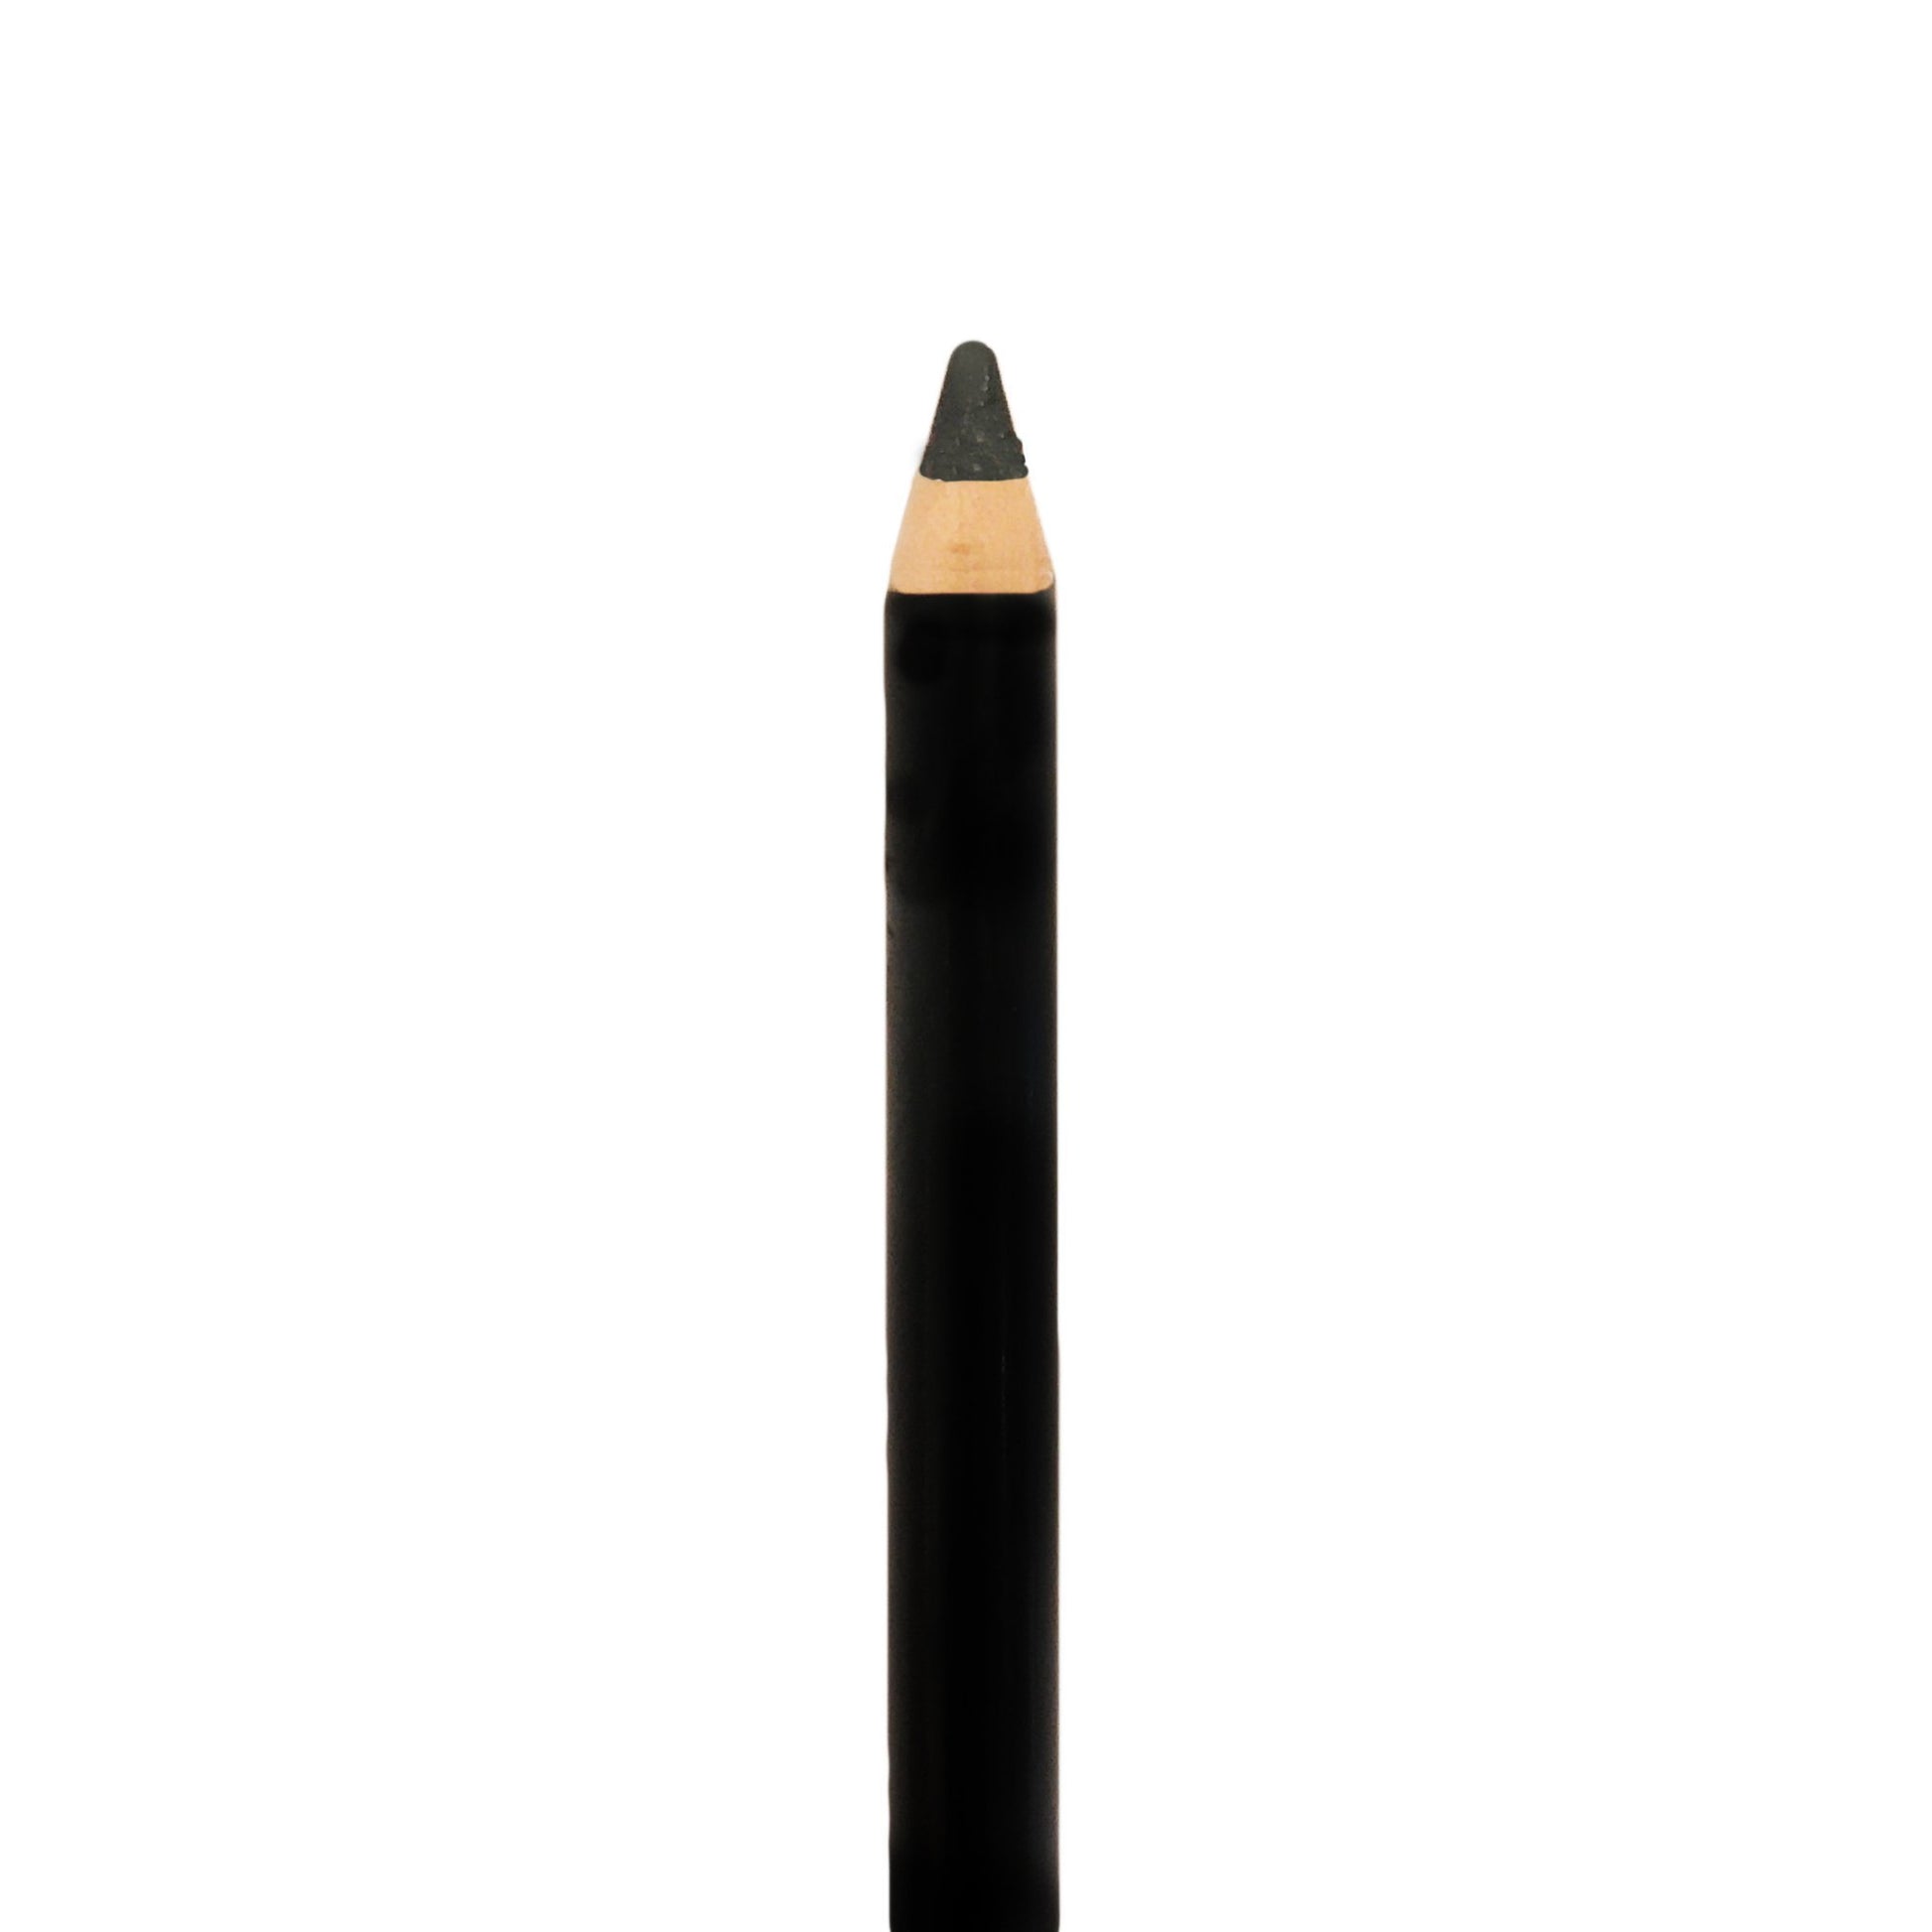 Black Shimmer Natural Eye Liner Pencil ready for your name by Indigo Private Label Cosmetics